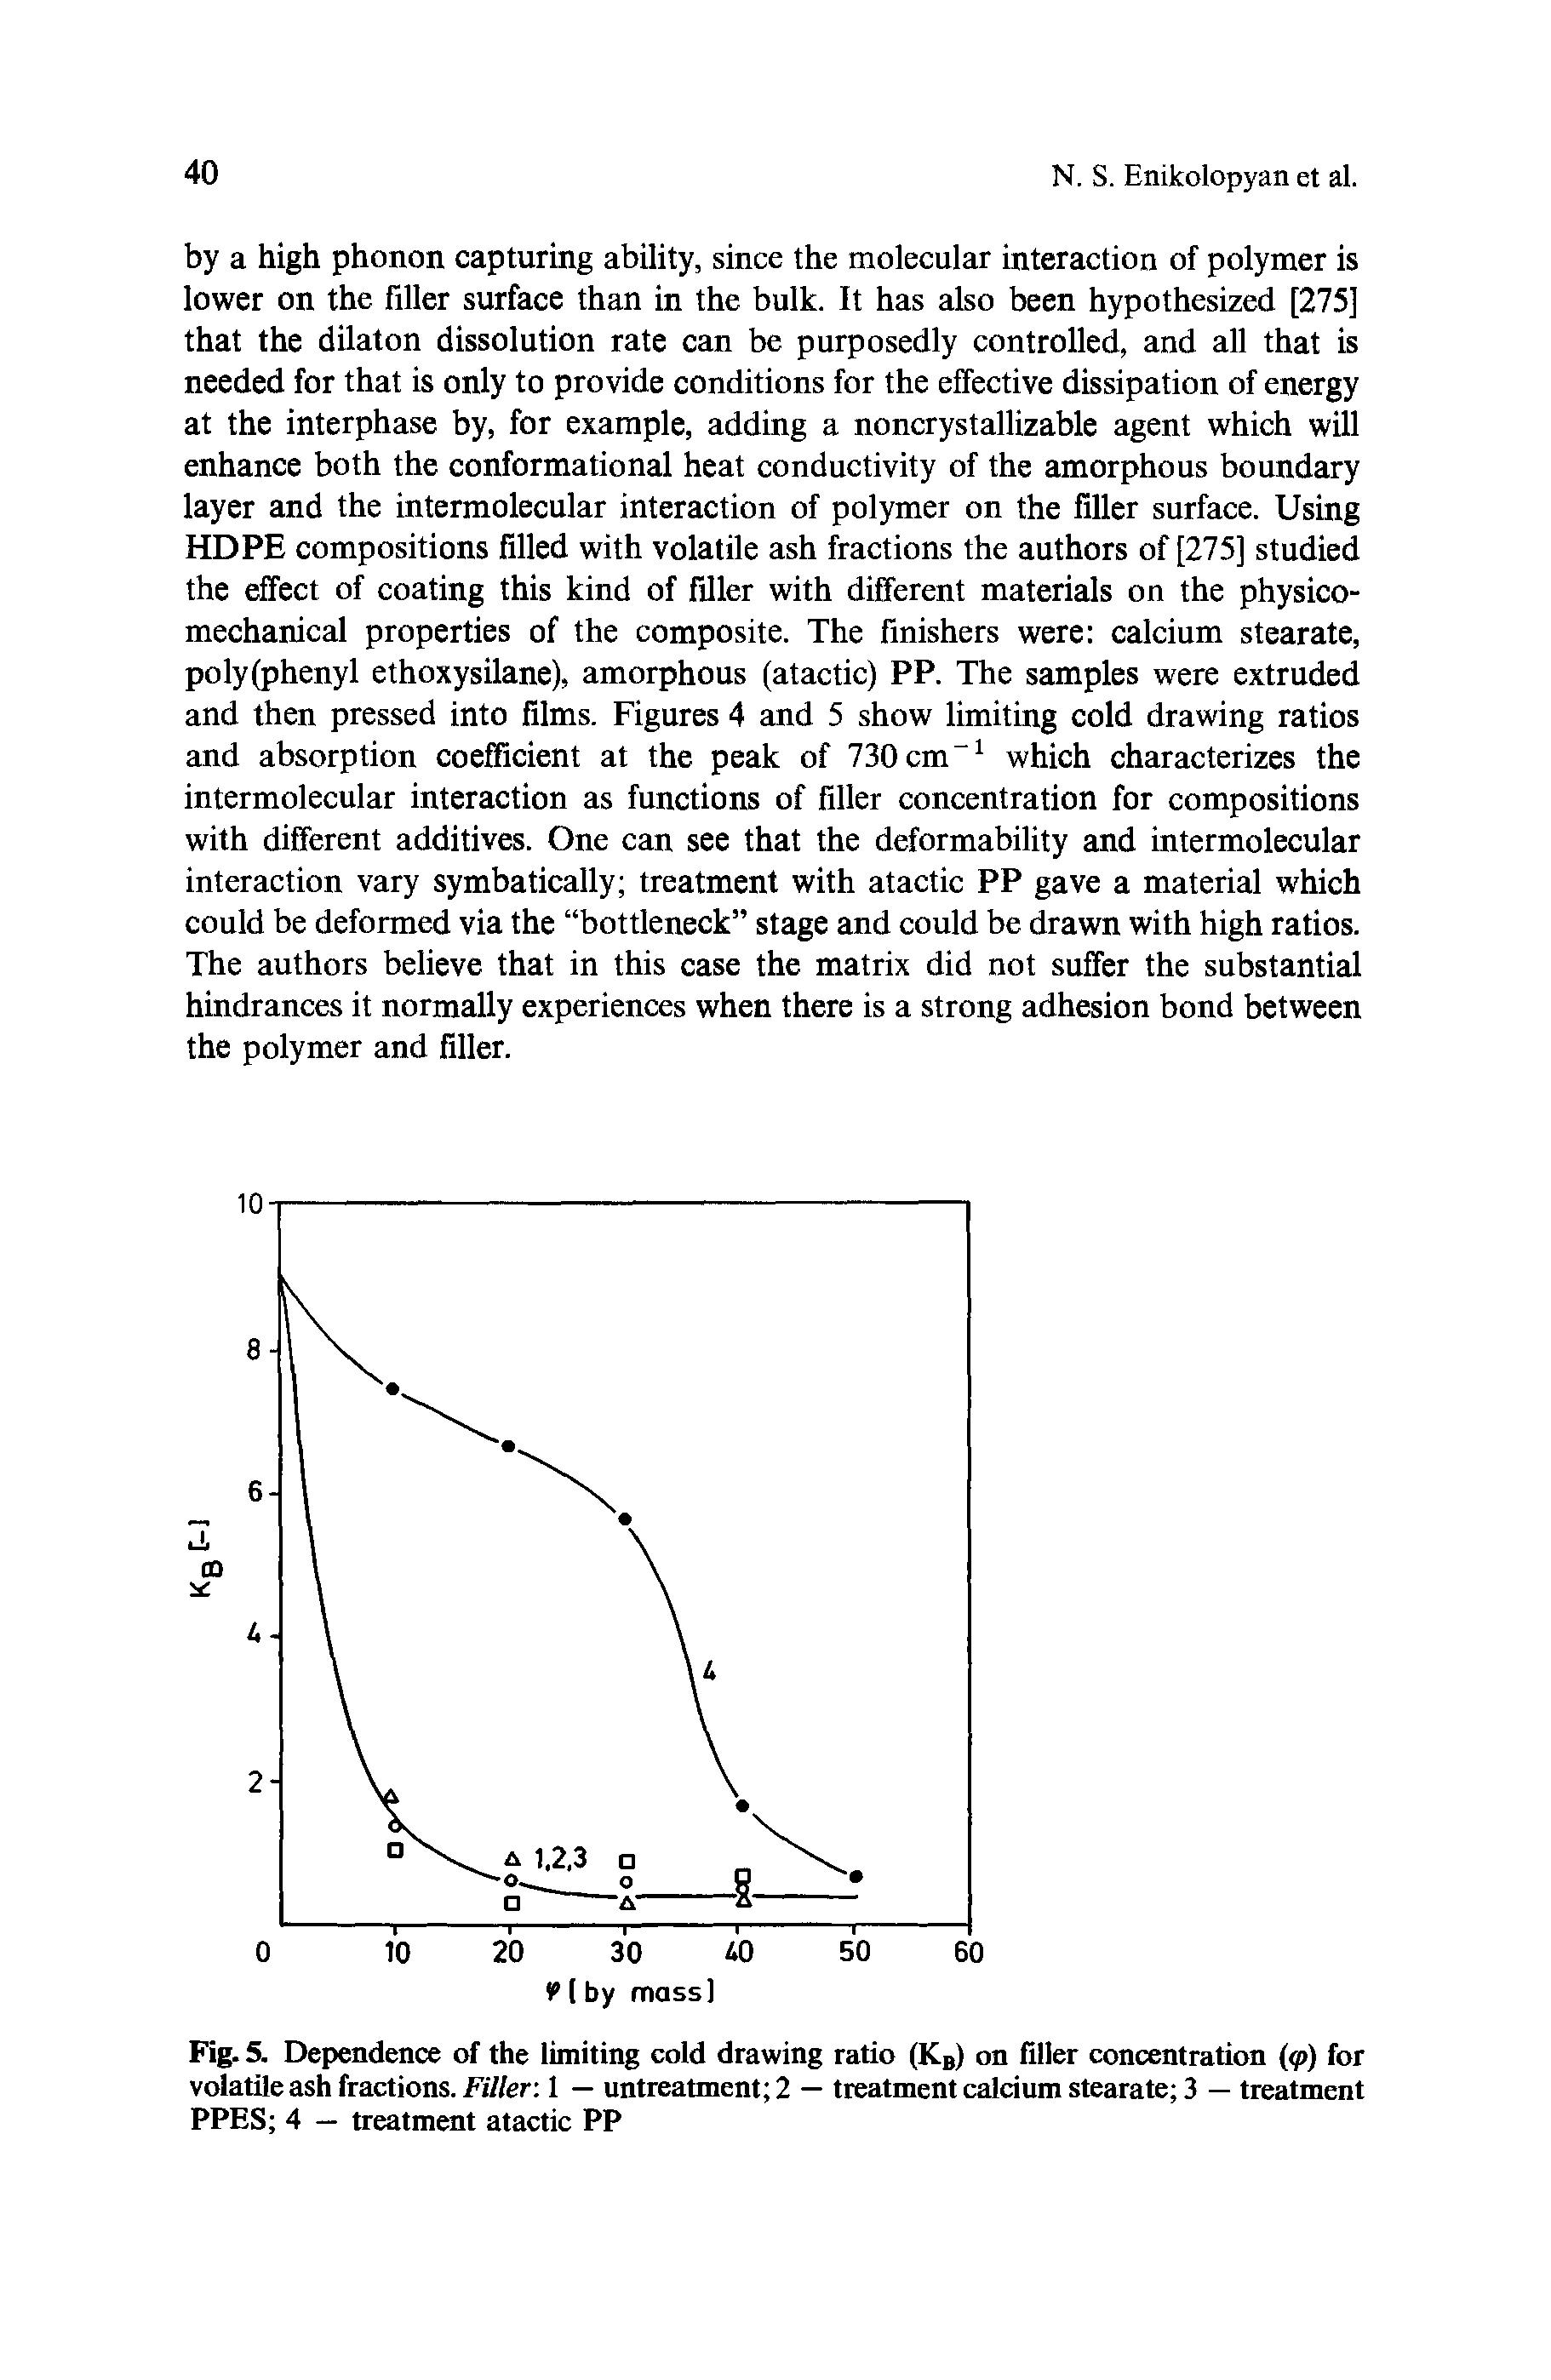 Fig. 5. Dependence of the limiting cold drawing ratio (KB) on filler concentration (<p) for volatile ash fractions. Filler 1 — untreatment 2 — treatment calcium stearate 3 — treatment PPES 4 — treatment atactic PP...